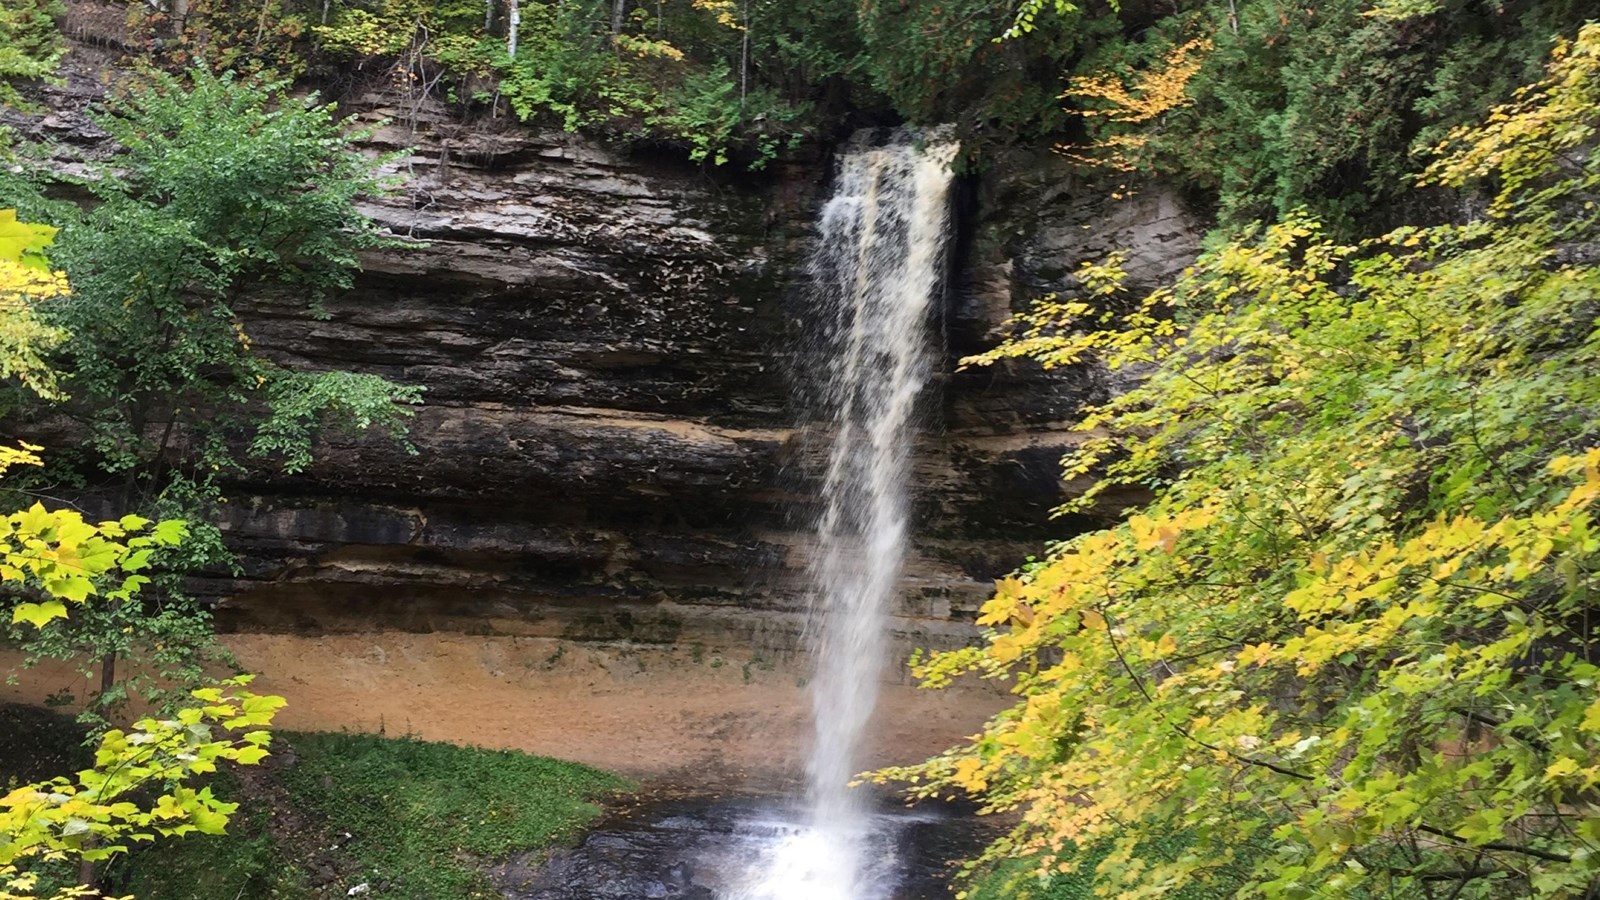 Munising Falls flows 50 feet over the sandstone rock ledge. Yellow and green leaves on the trees in 